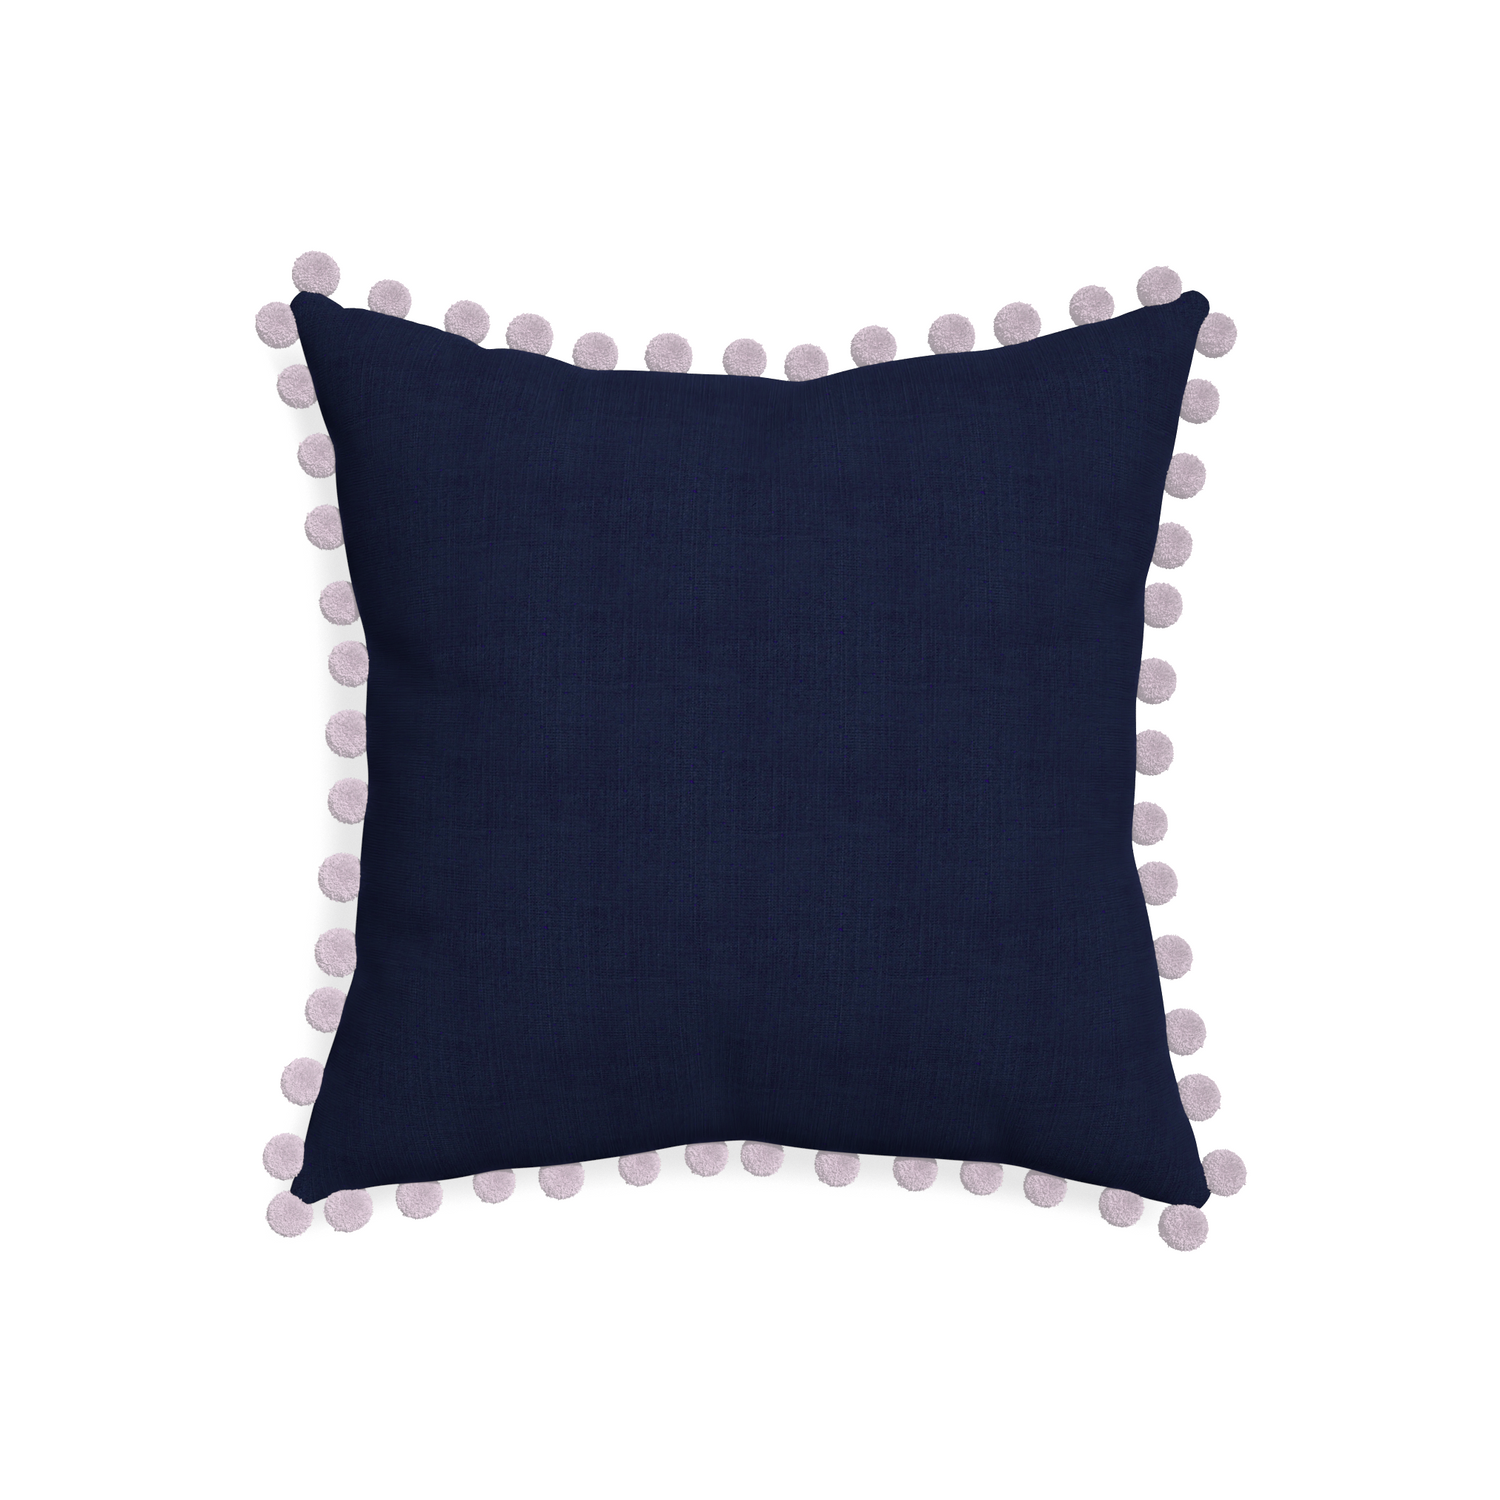 20-square midnight custom navy bluepillow with l on white background